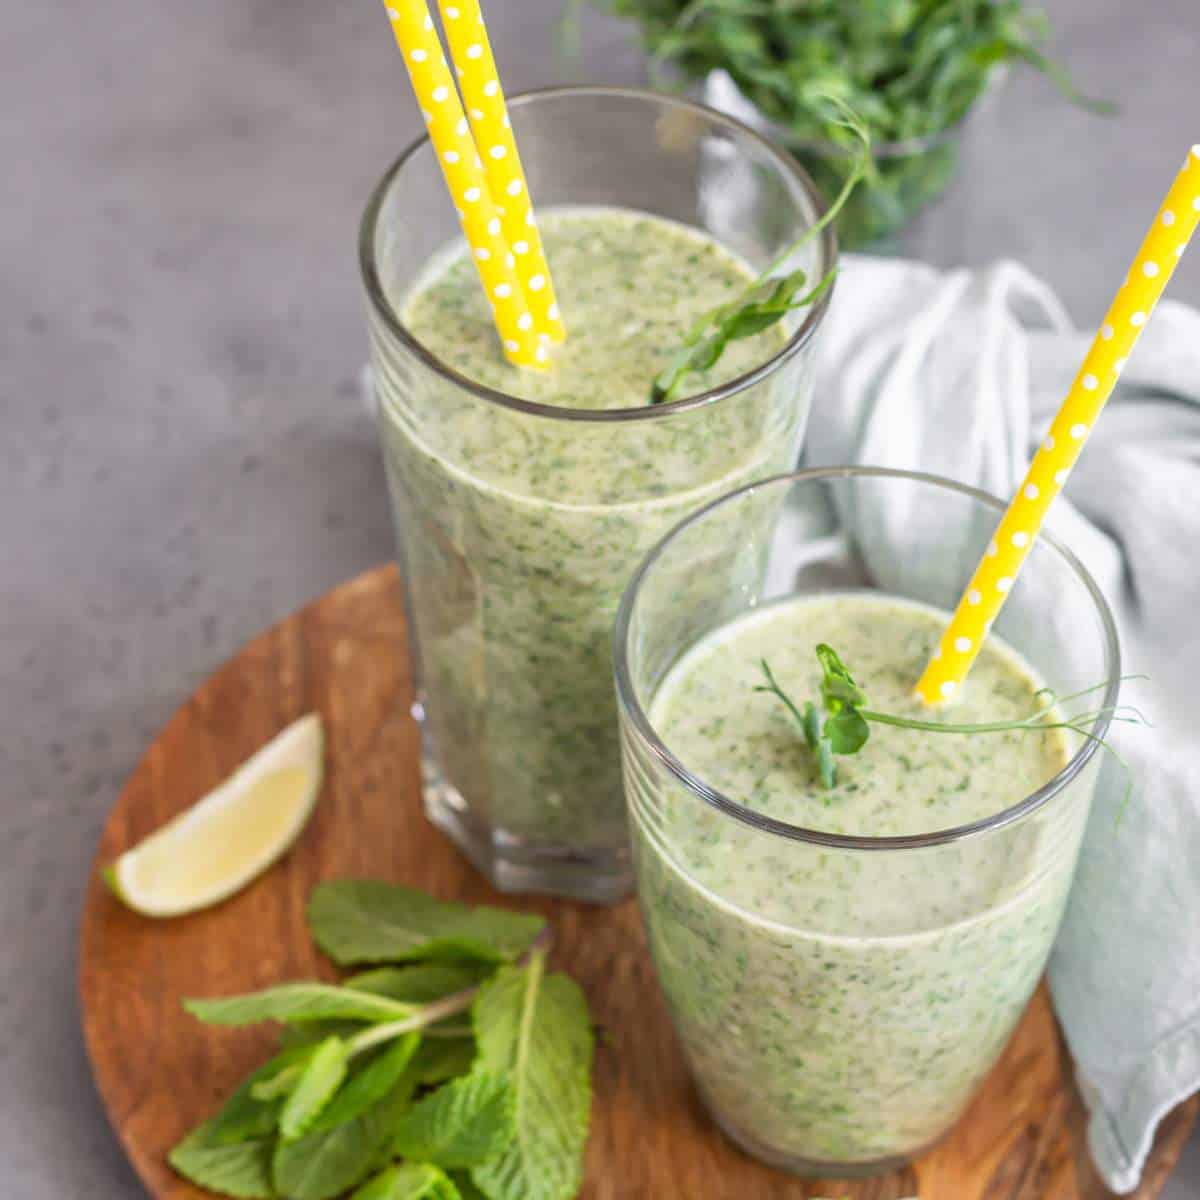 Two glasses of green smoothie on a wooden board.